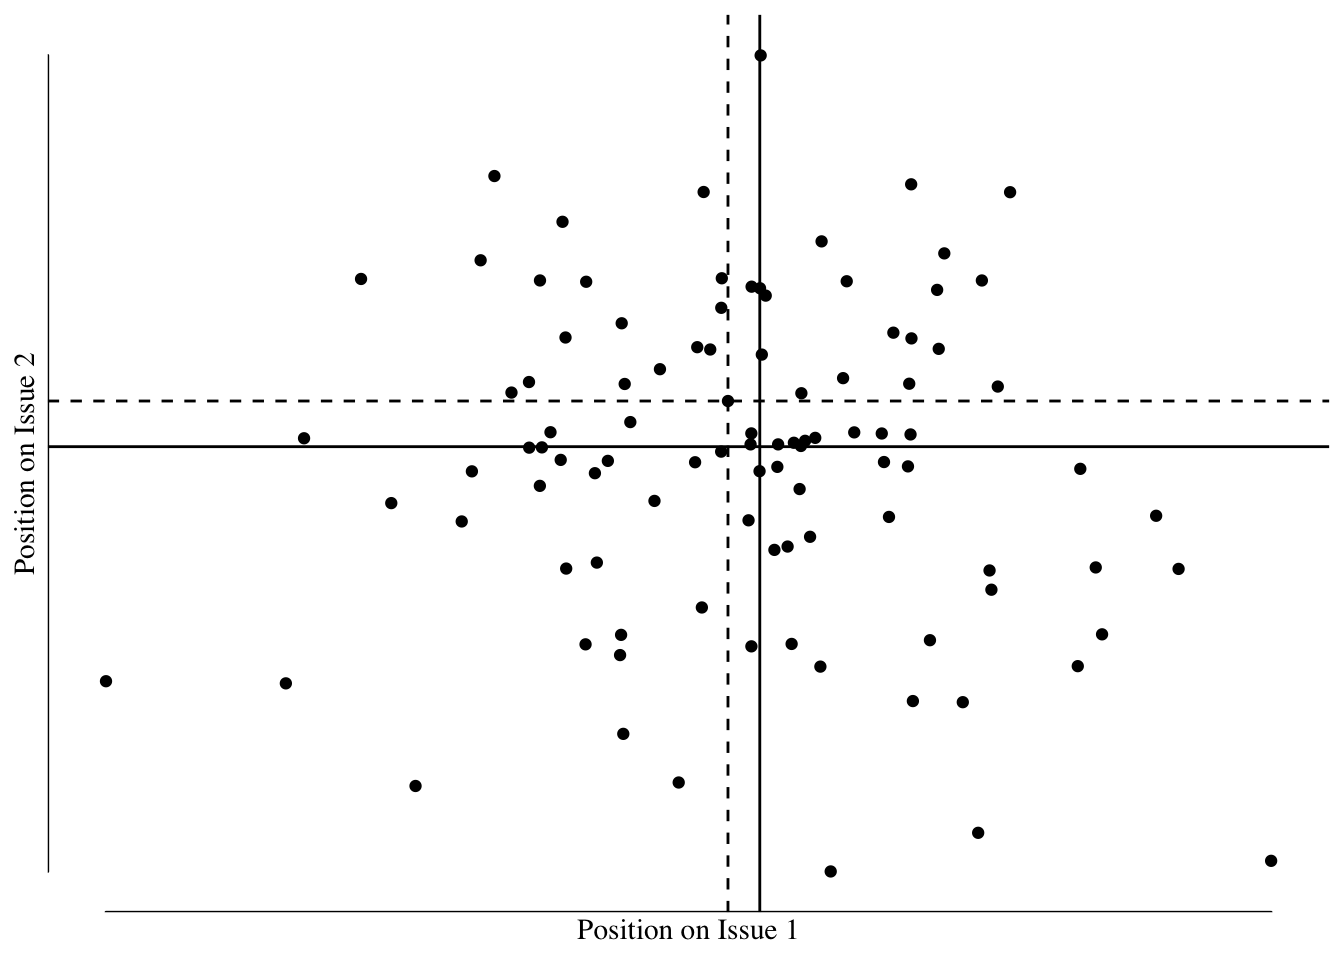 Example of difference between the single dimensional median voter positions (black solid lines) and the median voter over two issues (dashed lines).